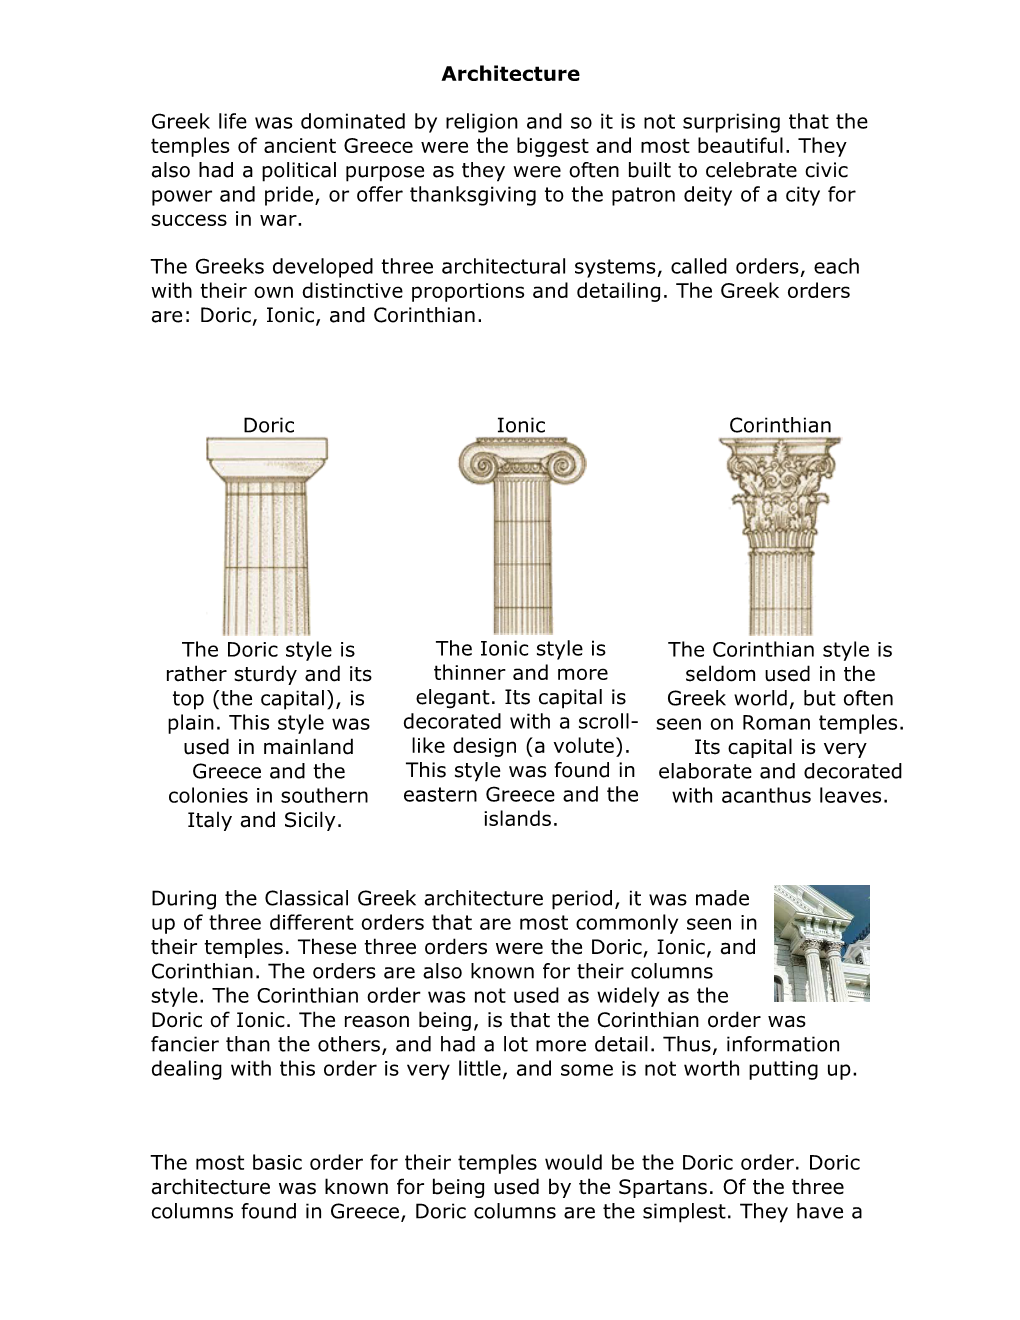 Greek Life Was Dominated by Religion and So It Is Not Surprising That the Temples of Ancient